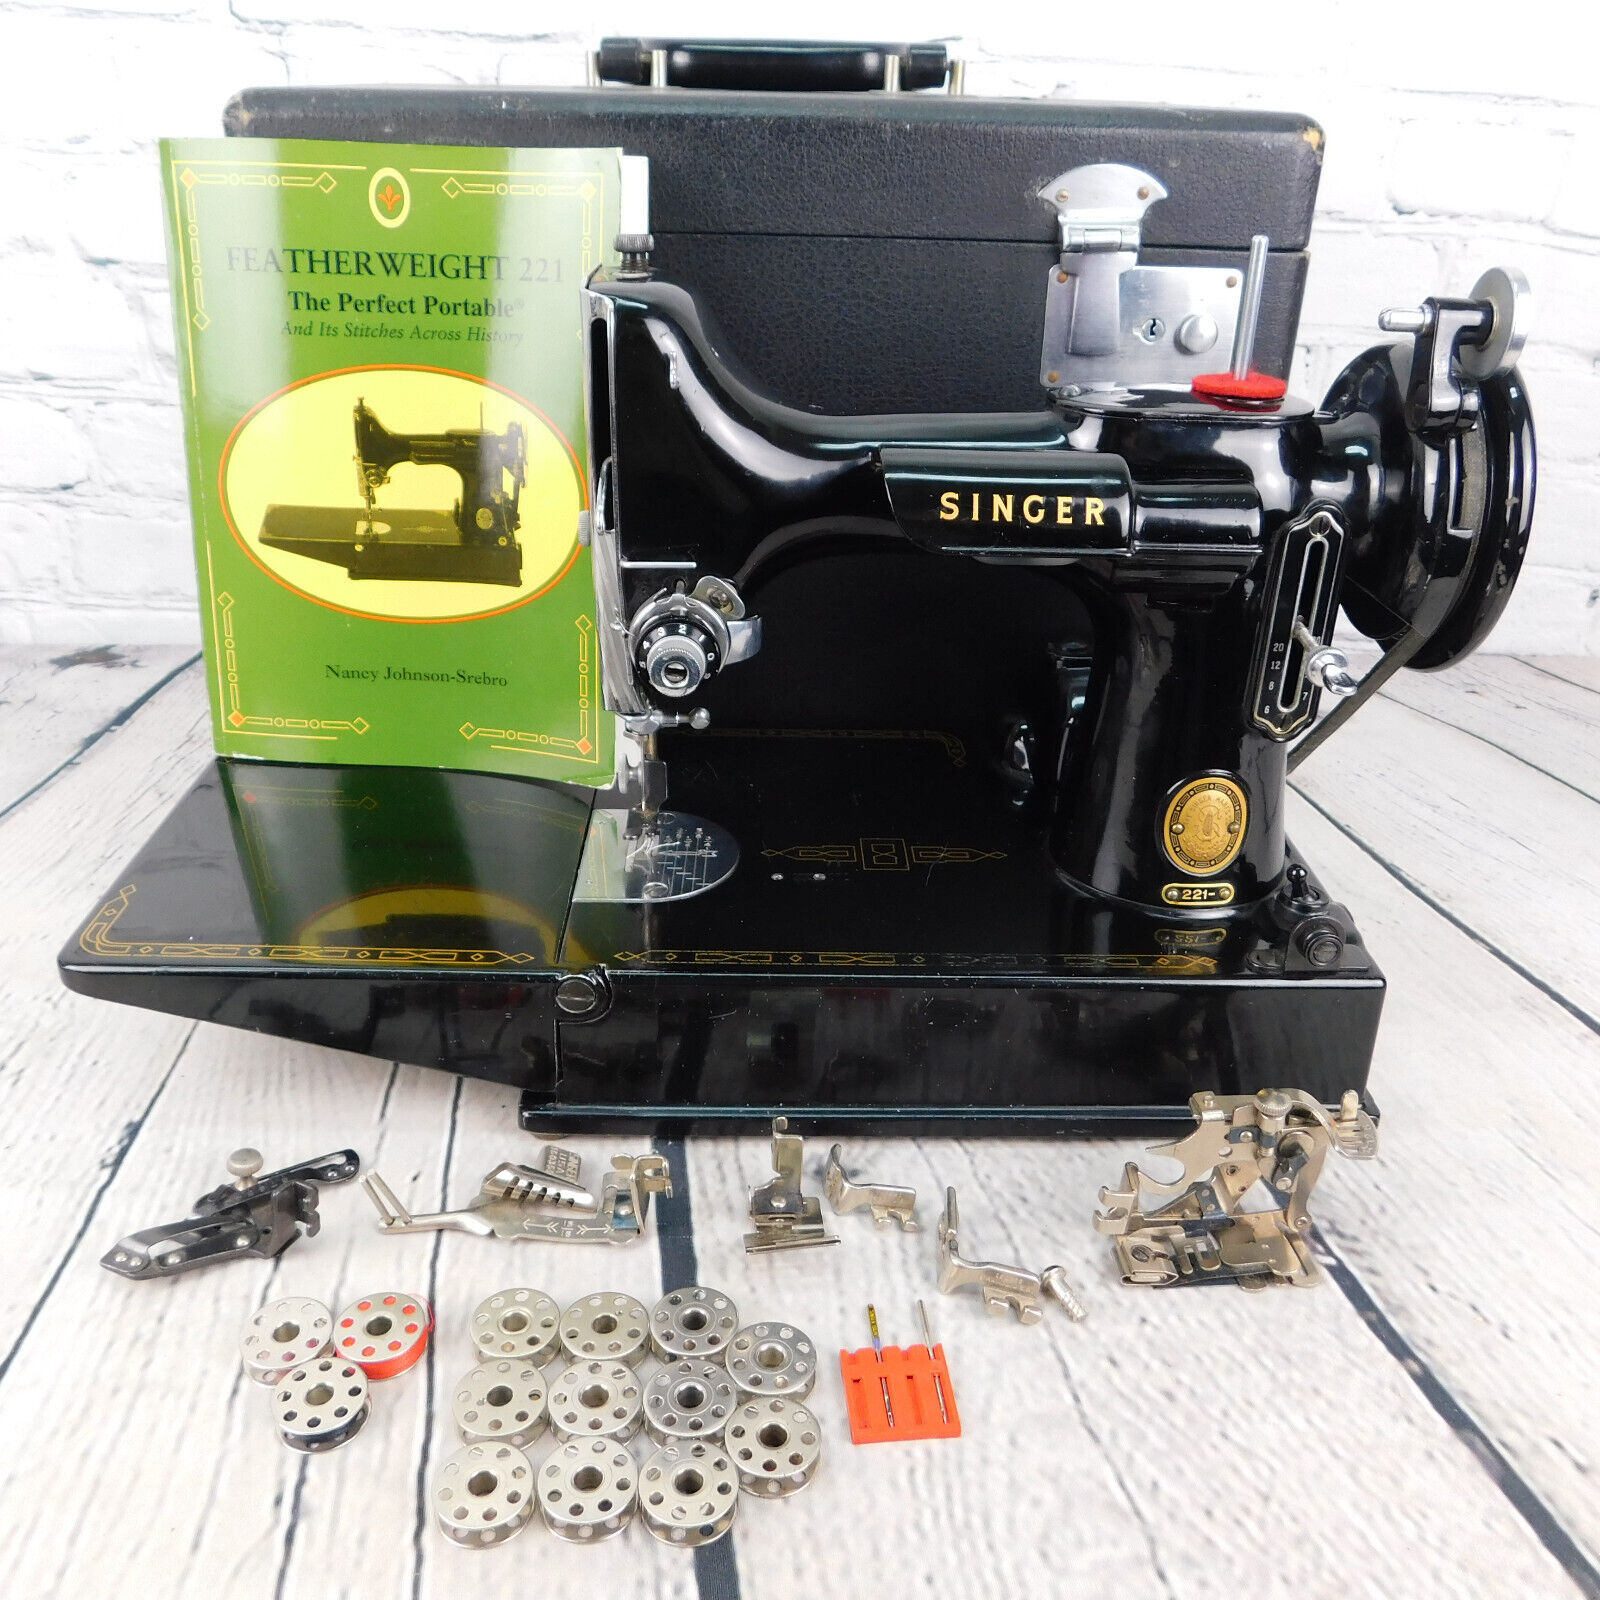 VTG Singer Featherweight Sewing Machine 221 w/ Attachments Manual & Case 1955